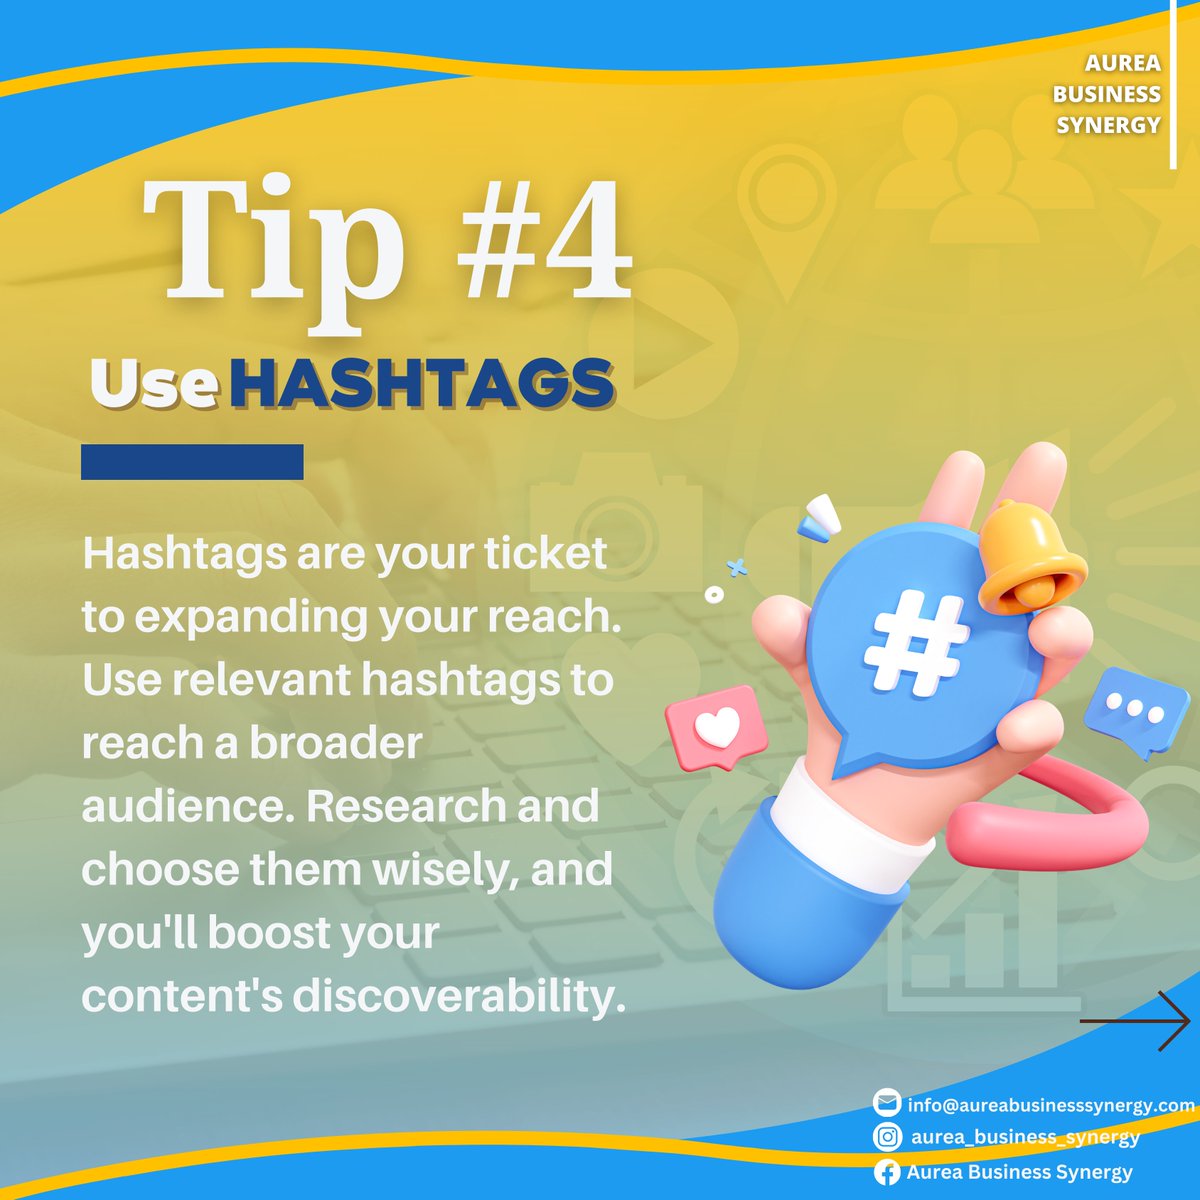 𝐓𝐢𝐩 #𝟒 - 𝐔𝐬𝐞 𝐇𝐚𝐬𝐡𝐭𝐚𝐠𝐬 📷

By incorporating relevant and well-researched hashtags, your content becomes discoverable to a broader audience.

#ExpandYourReach #SocialMediaGrowth #SocialMediaManagement #AureaBusinessSynergy